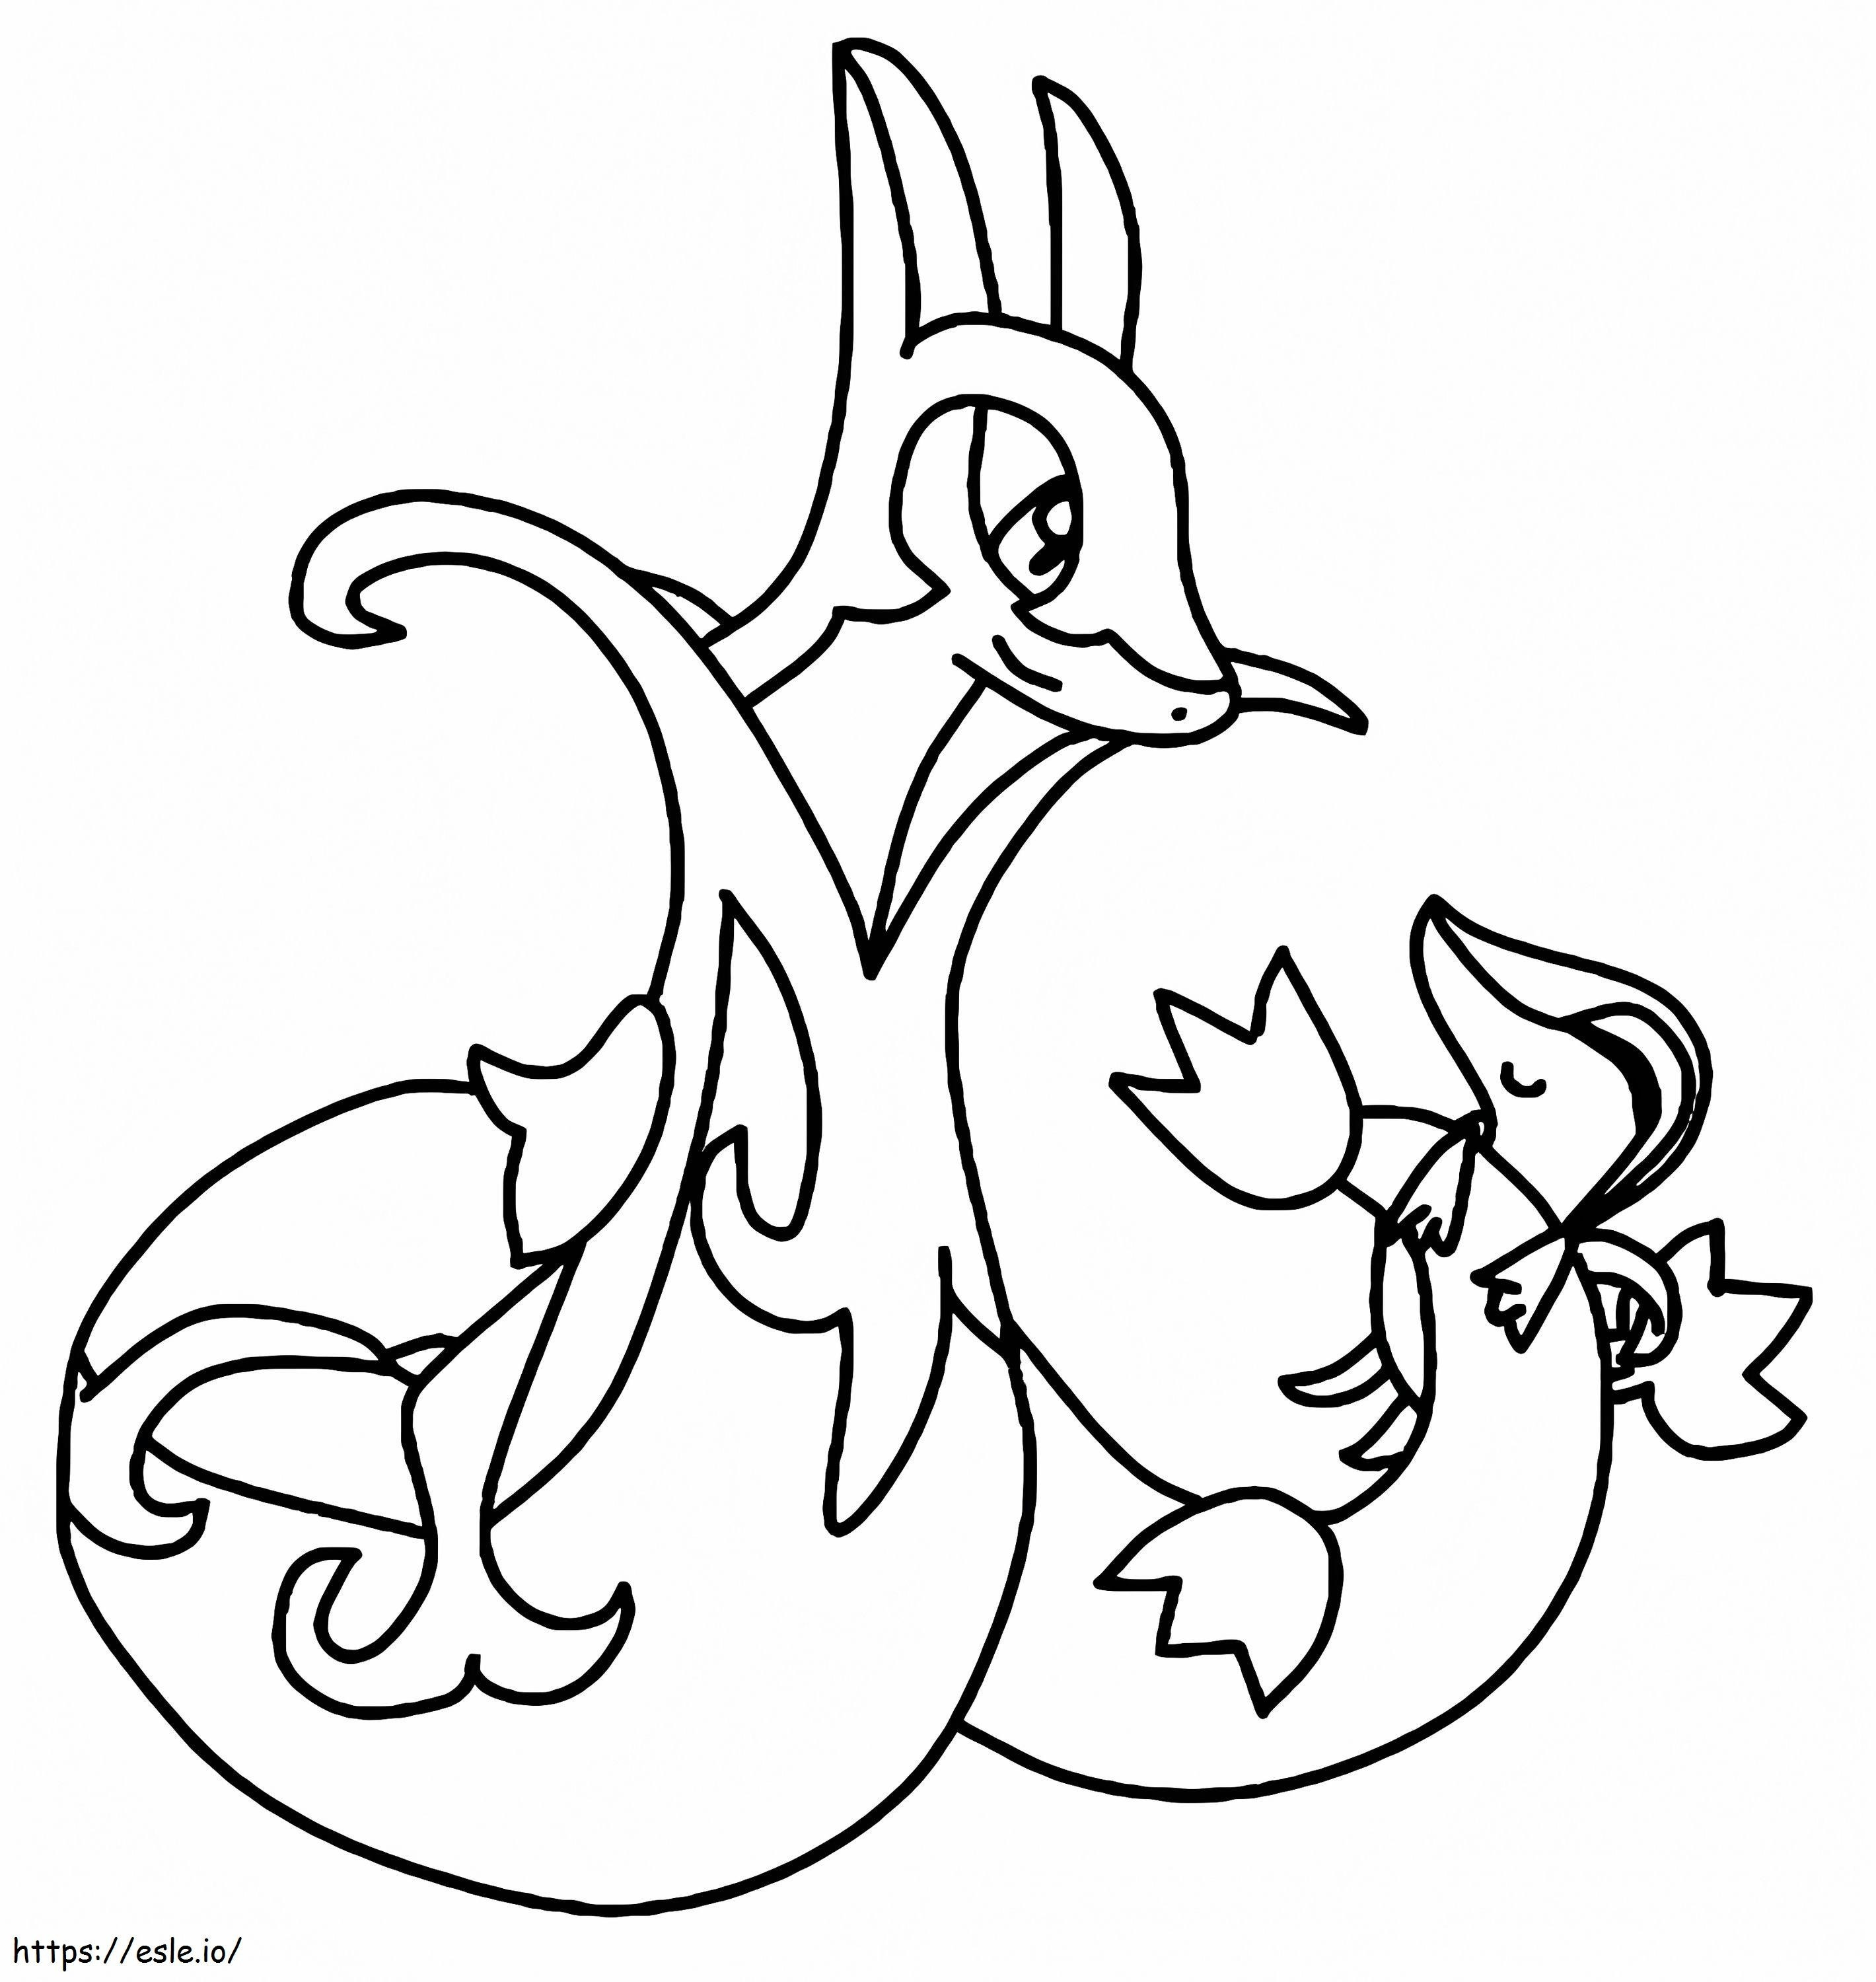 Snivy And Serperior coloring page